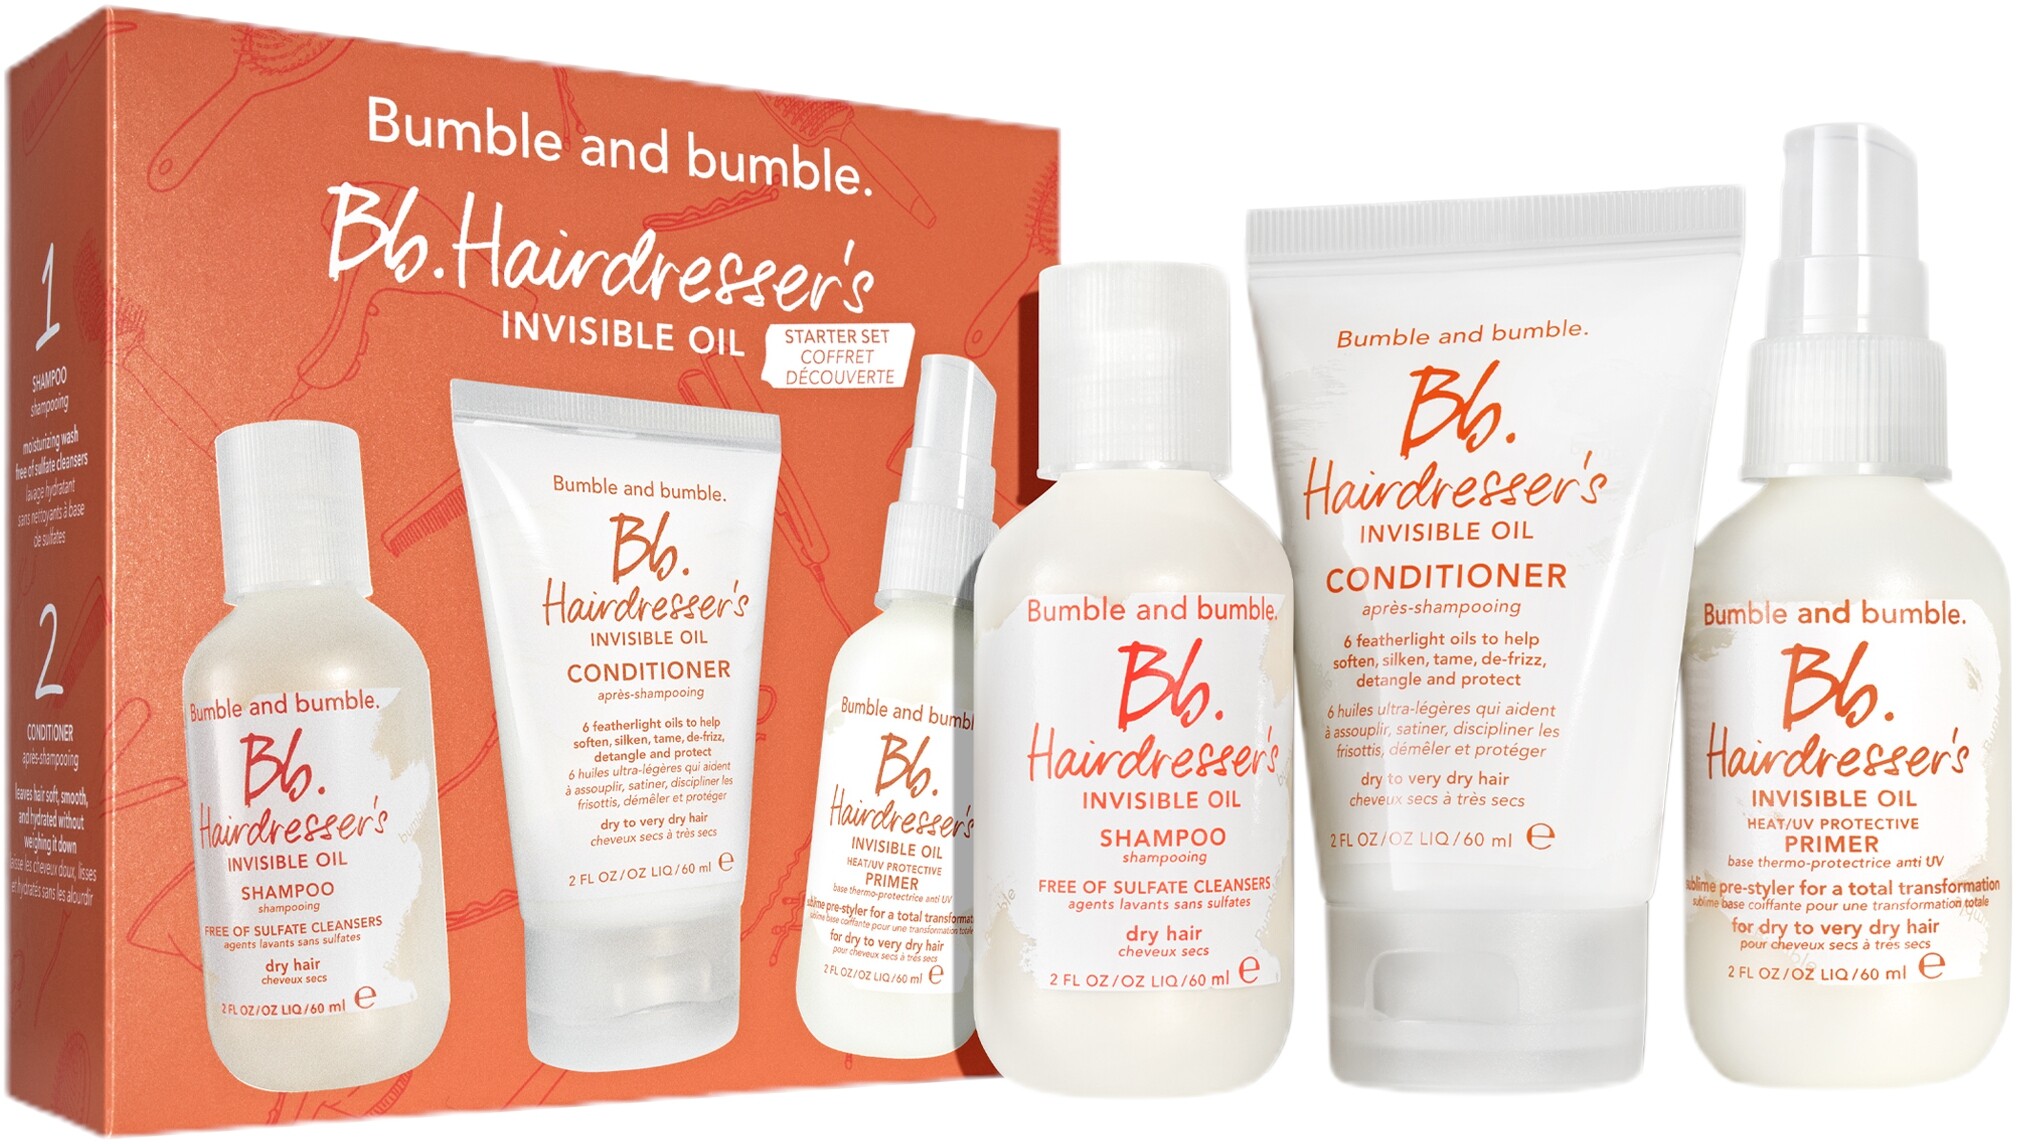 Bumble and bumble Bb. Hairdresser's Invisible Oil Starter Set